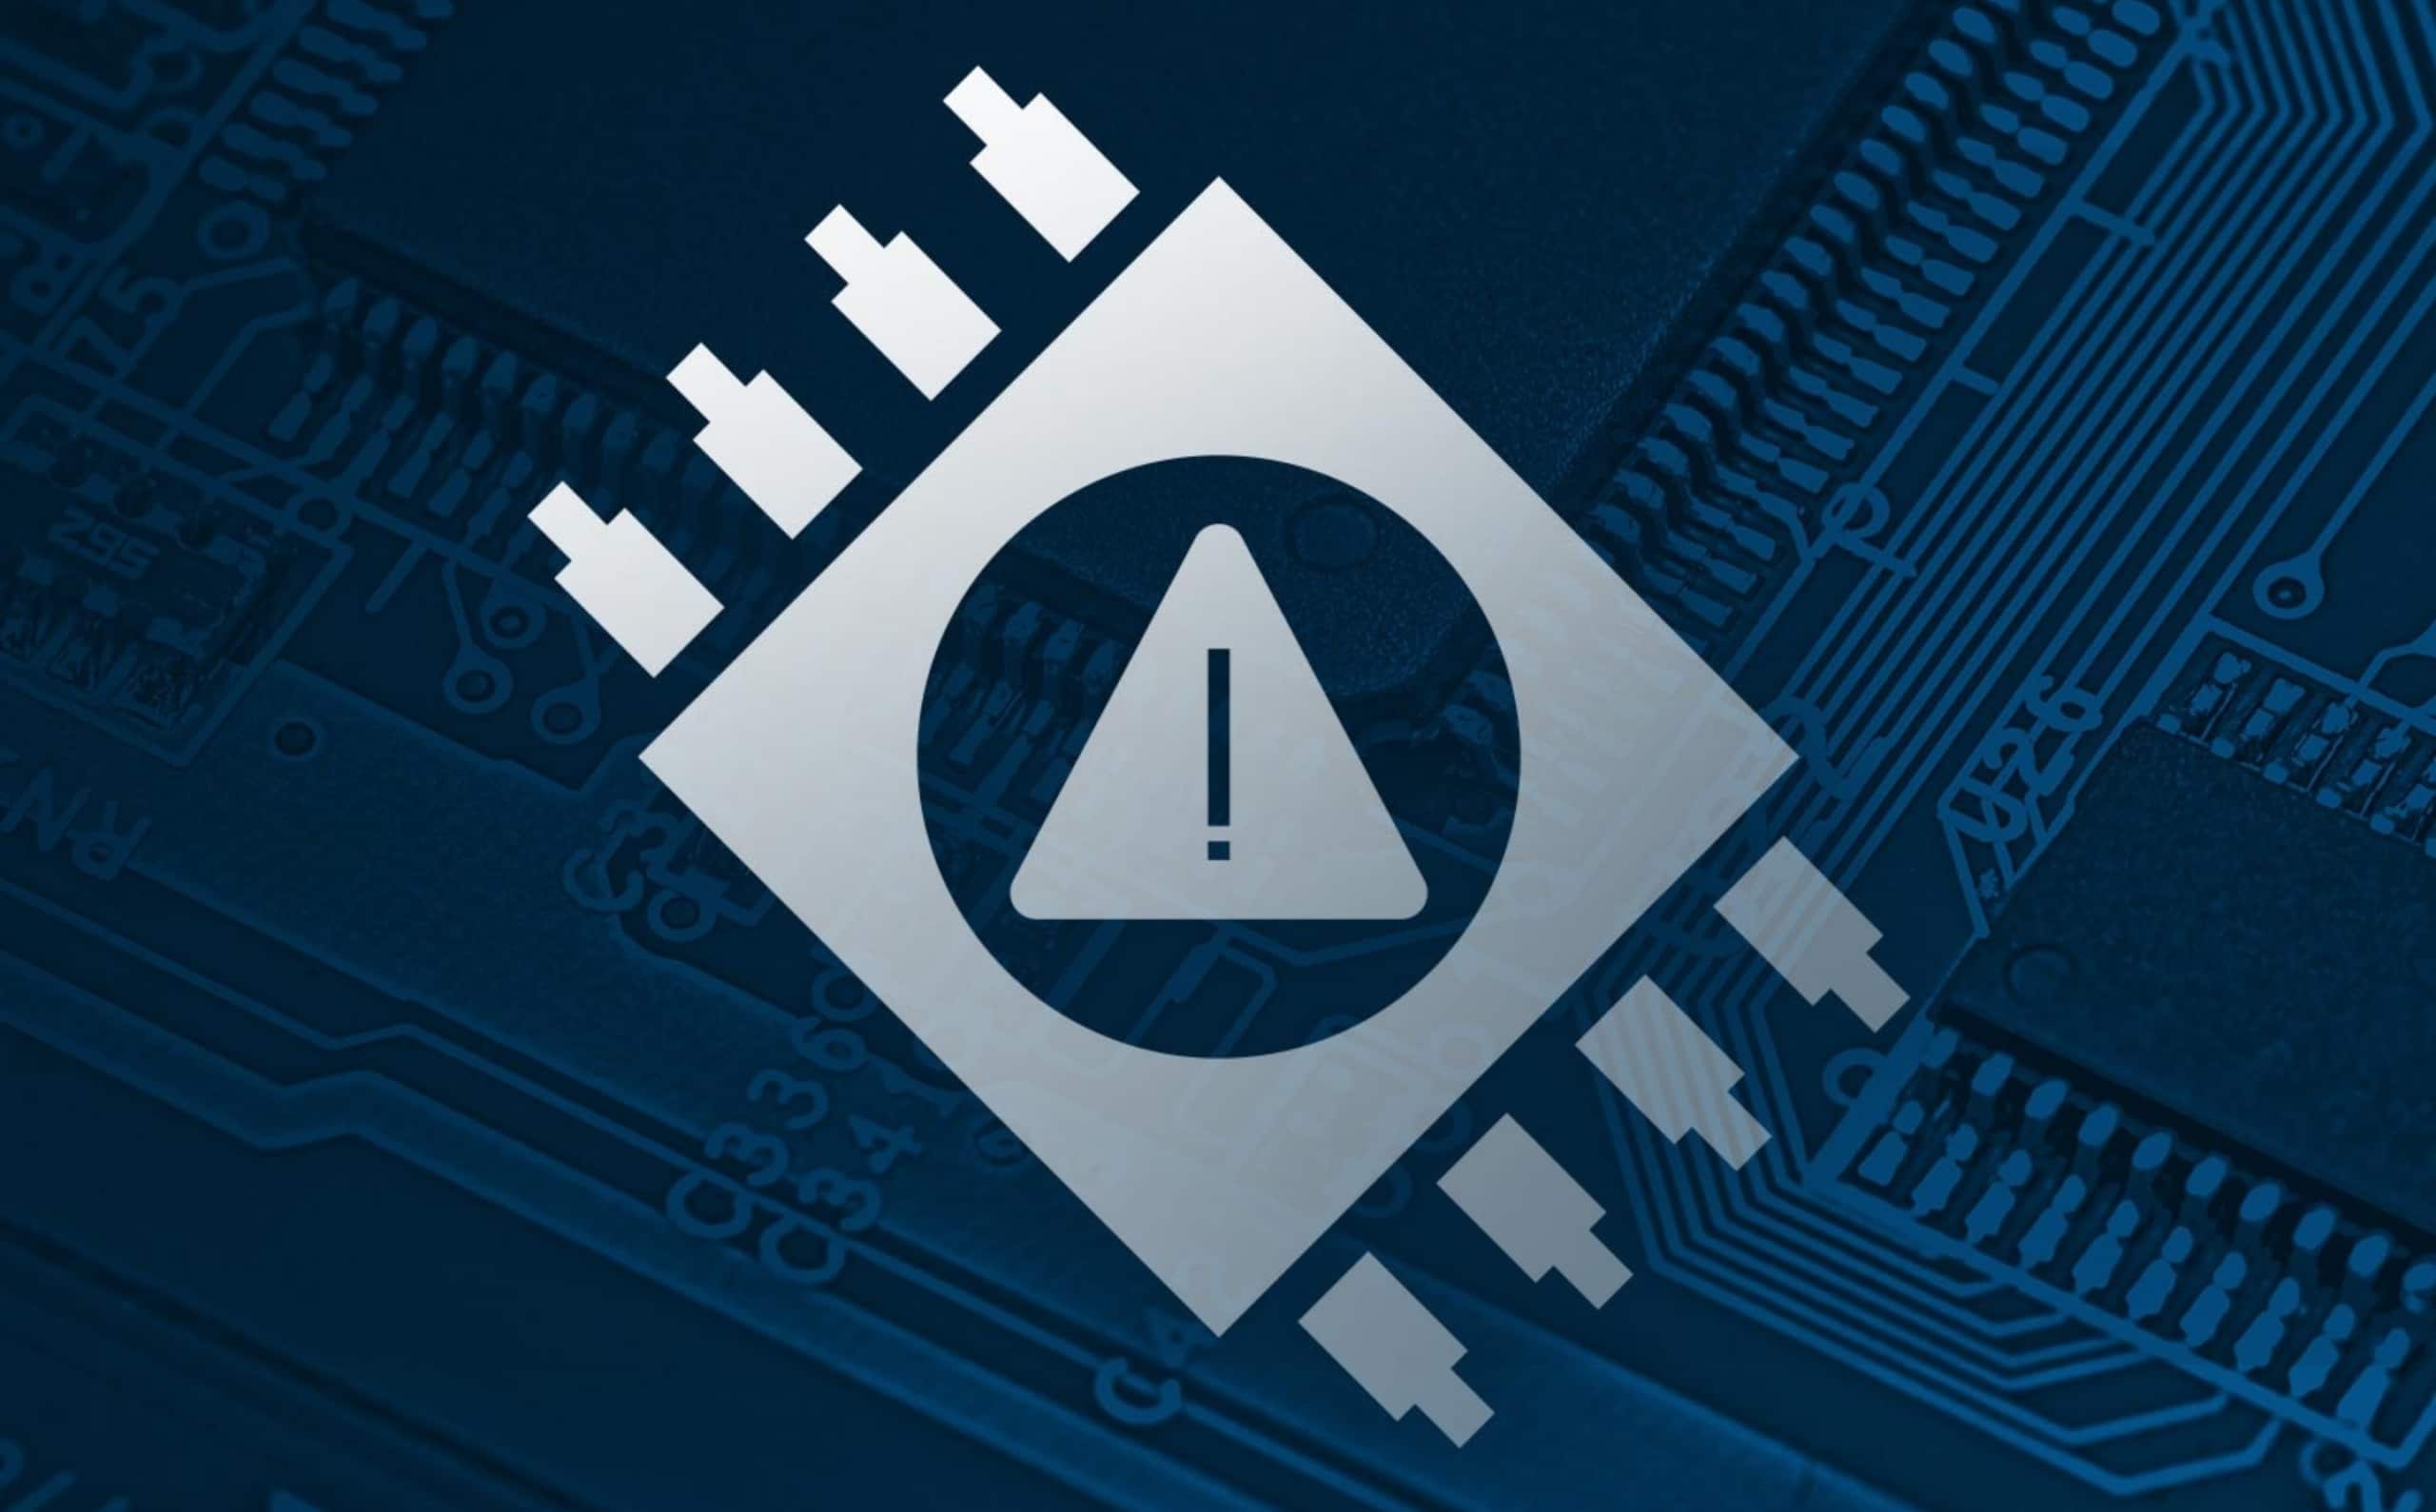 Circuitboard chip with a warning icon in the center